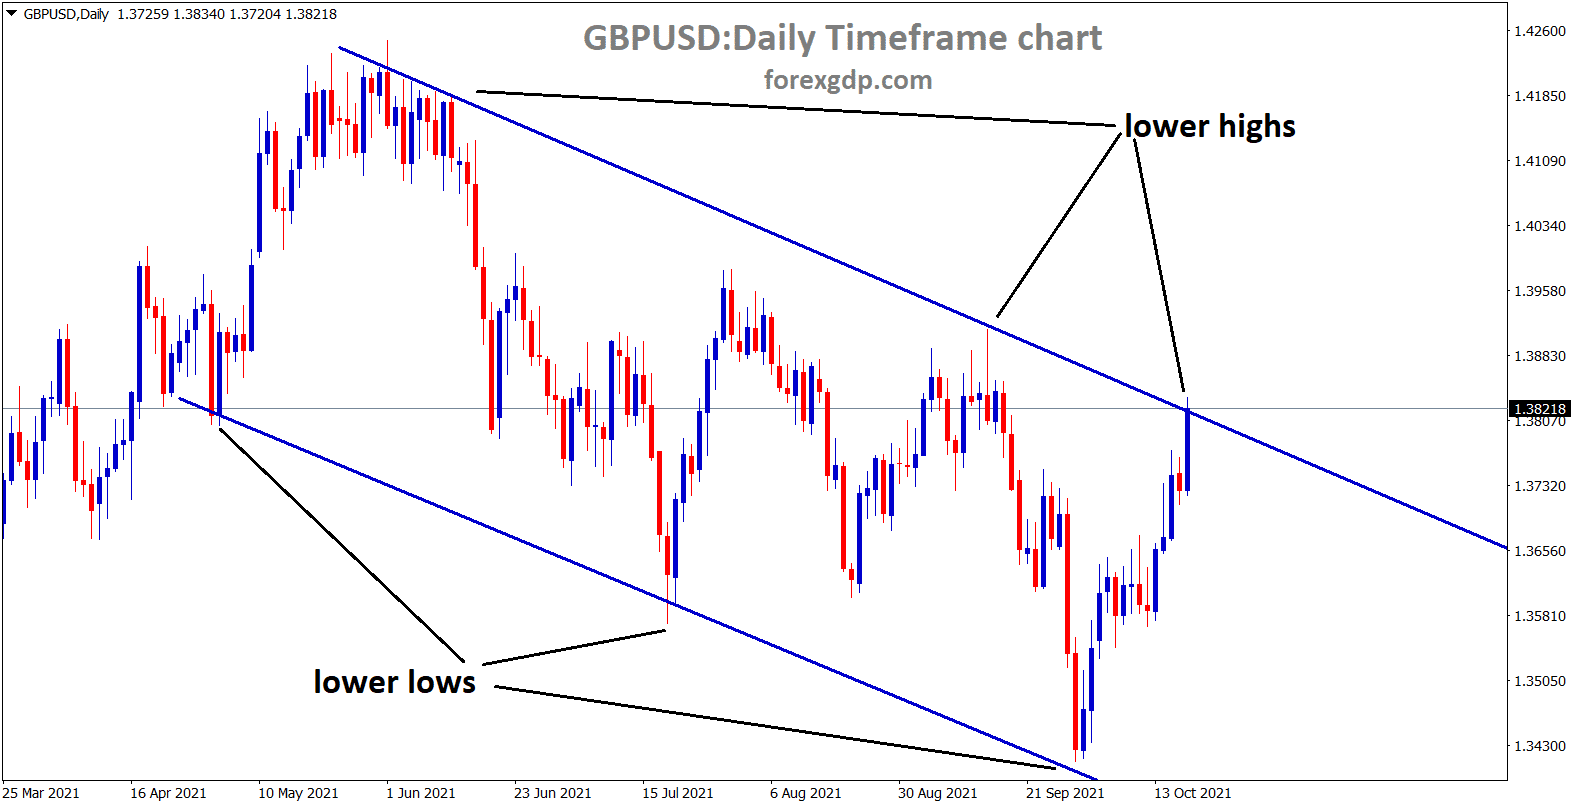 GBPUSD hits the lower high area of the descending channel exactly wait for breakout or reversal